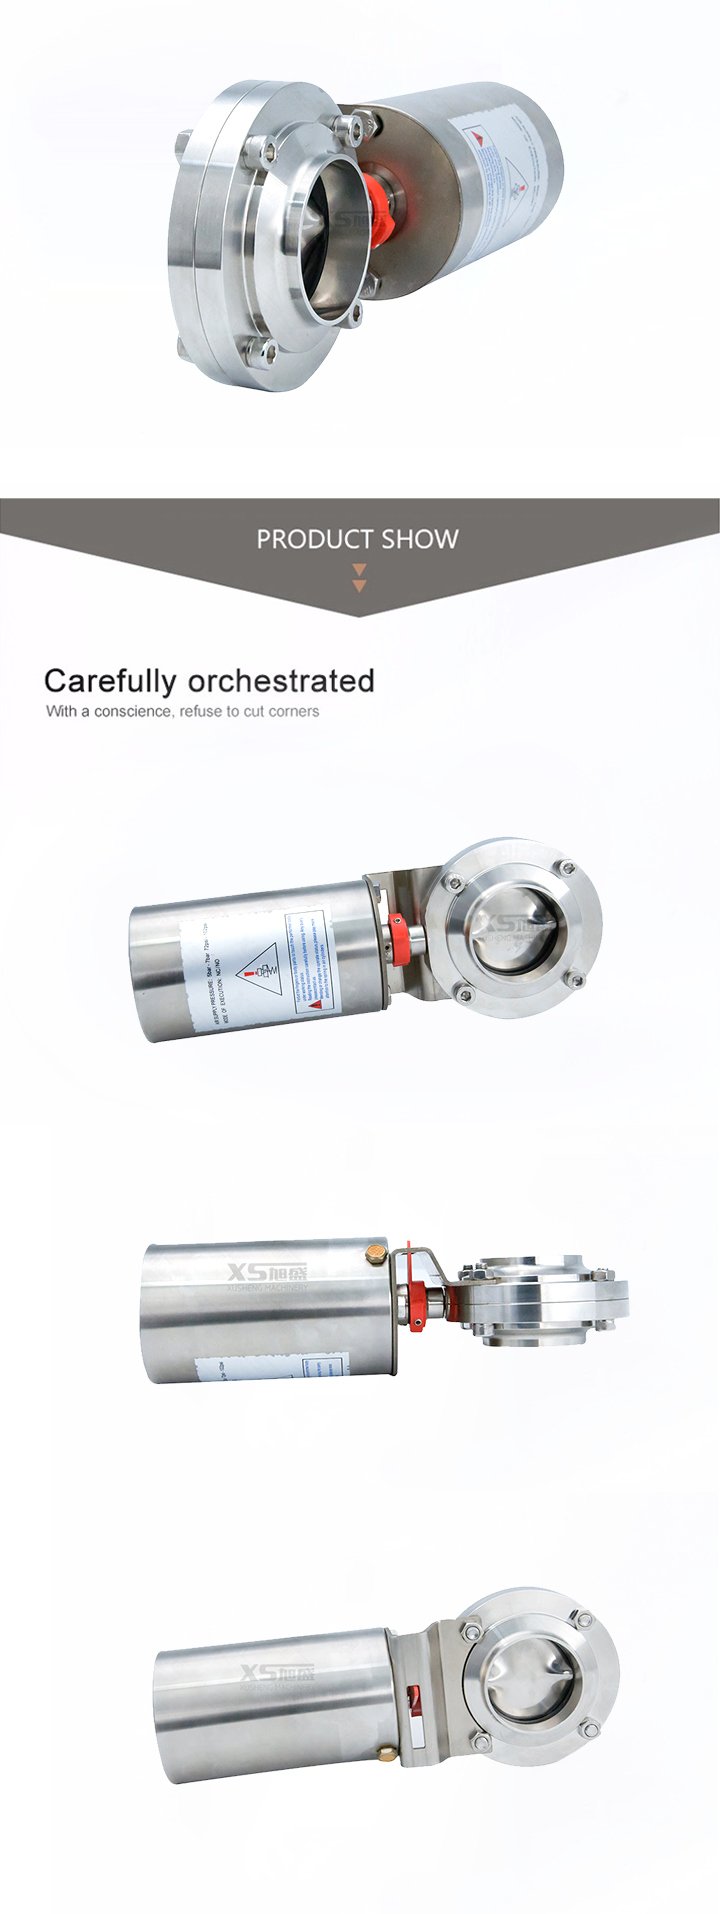 38.1mm SMS Stainless Steel Sanitary Pneumatic Air-Air Butterfly Valves